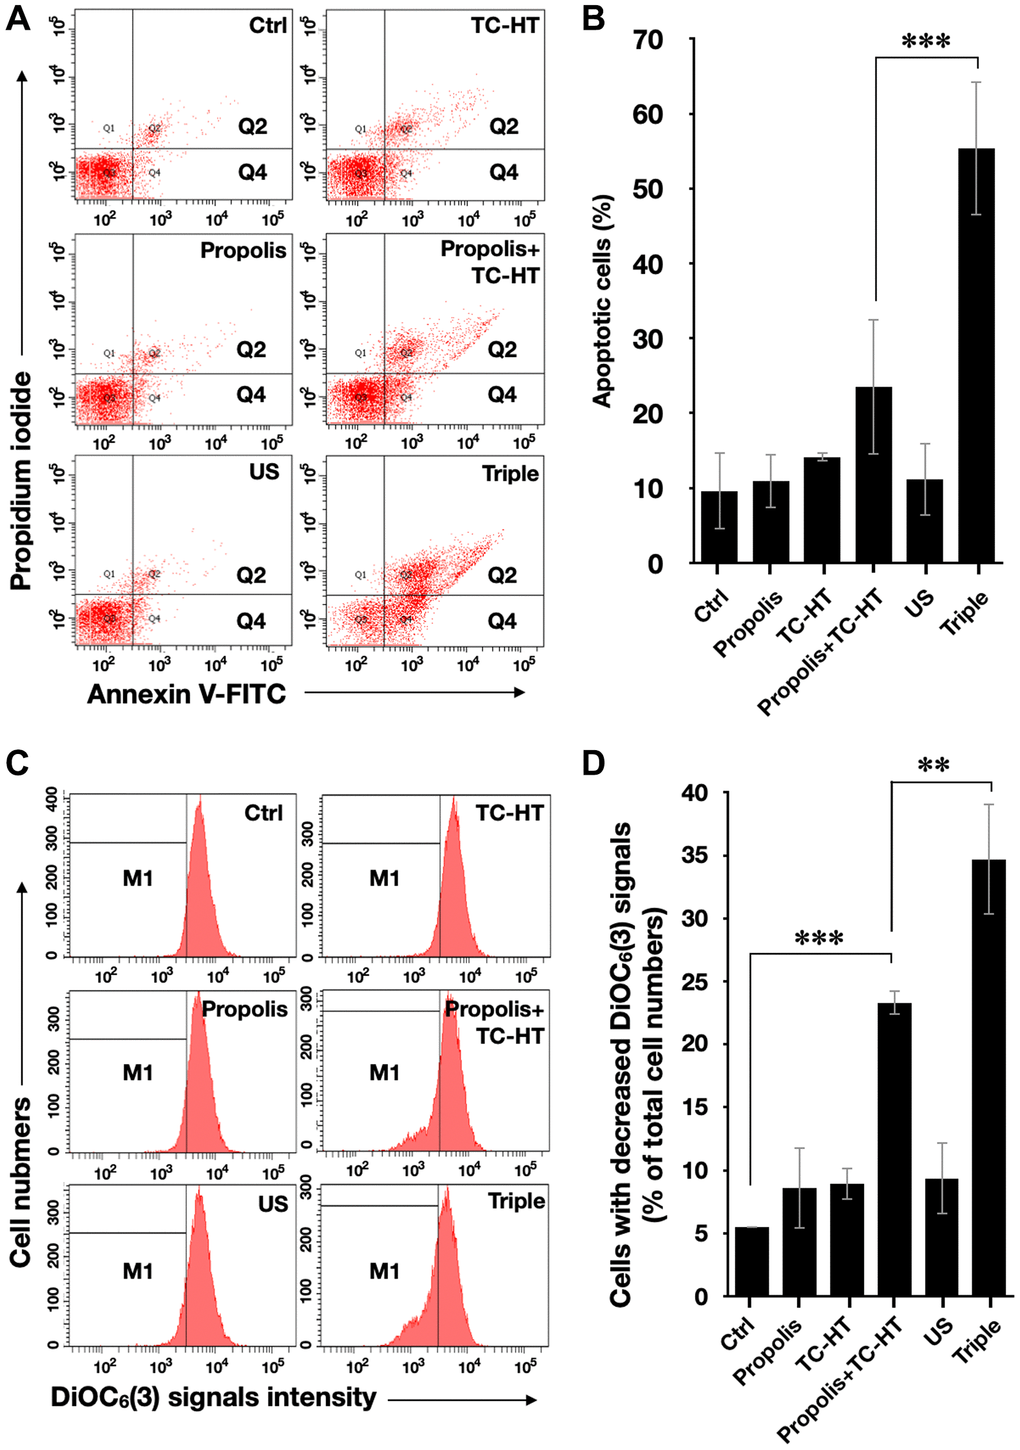 Triple treatment increased apoptosis on PANC-1 cells via mitochondrial dysfunction. (A) Apoptosis after treatment was analyzed via flow cytometry with Annexin V-FITC/PI double staining, and (B) the apoptotic percentage (Q2 + Q4) was calculated. (C) MMP level after treatment was analyzed via flow cytometry with DiOC6(3) staining, and (D) the percentage of cells with the loss of MMP (M1) was calculated. Data were presented as the mean ± standard deviation in triplicate. **P ***P 